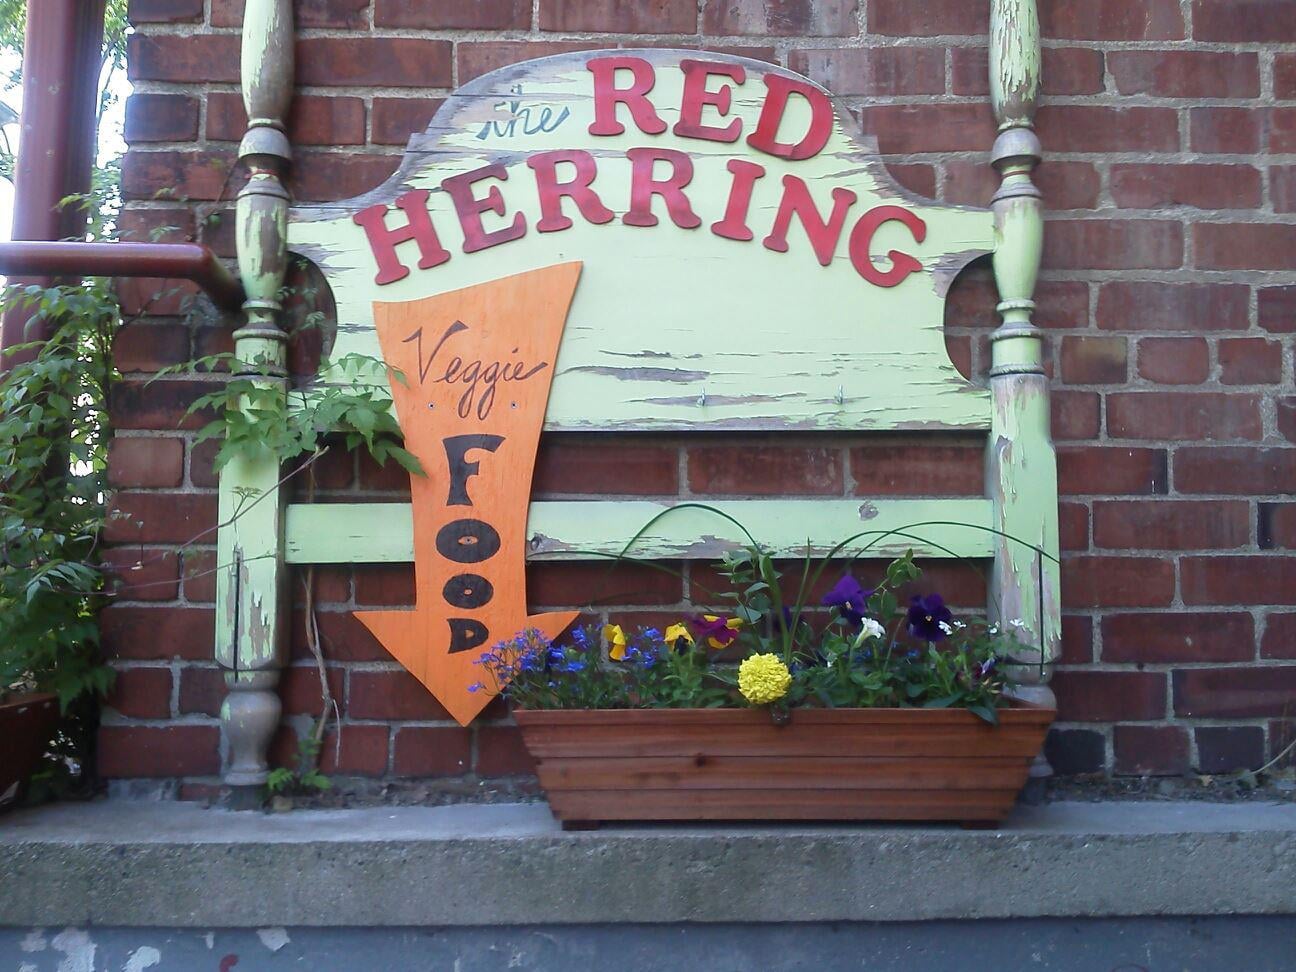 The Red Herring is hosting an Earth Day Open House on April 20th